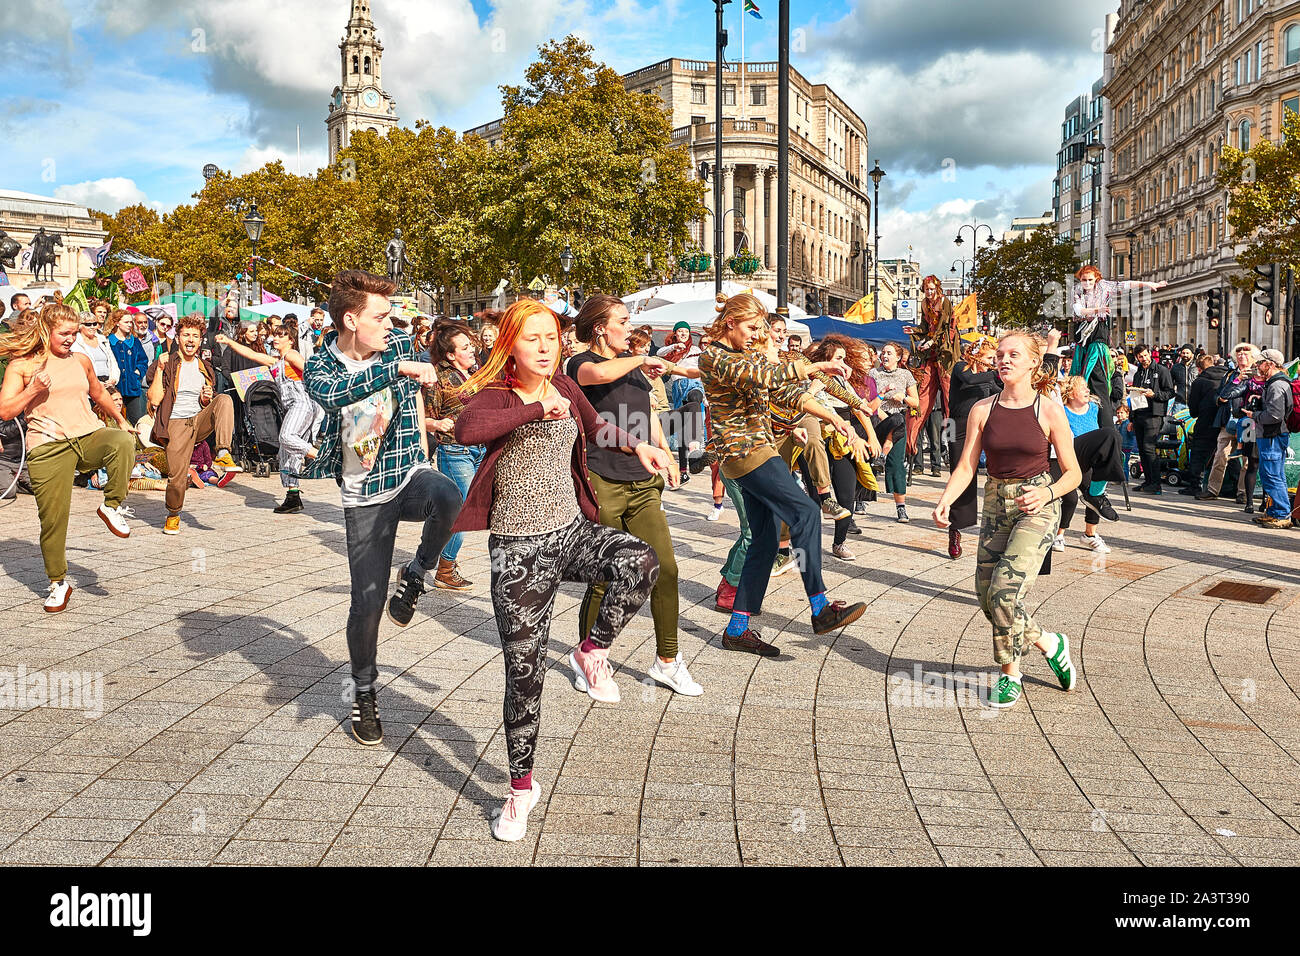 London, U.K. - Oct 9, 2019: Student environmental campaigners dancing in Trafalgar Square on the third day of a planned two weeks of protests by Extinction Rebellion. Stock Photo